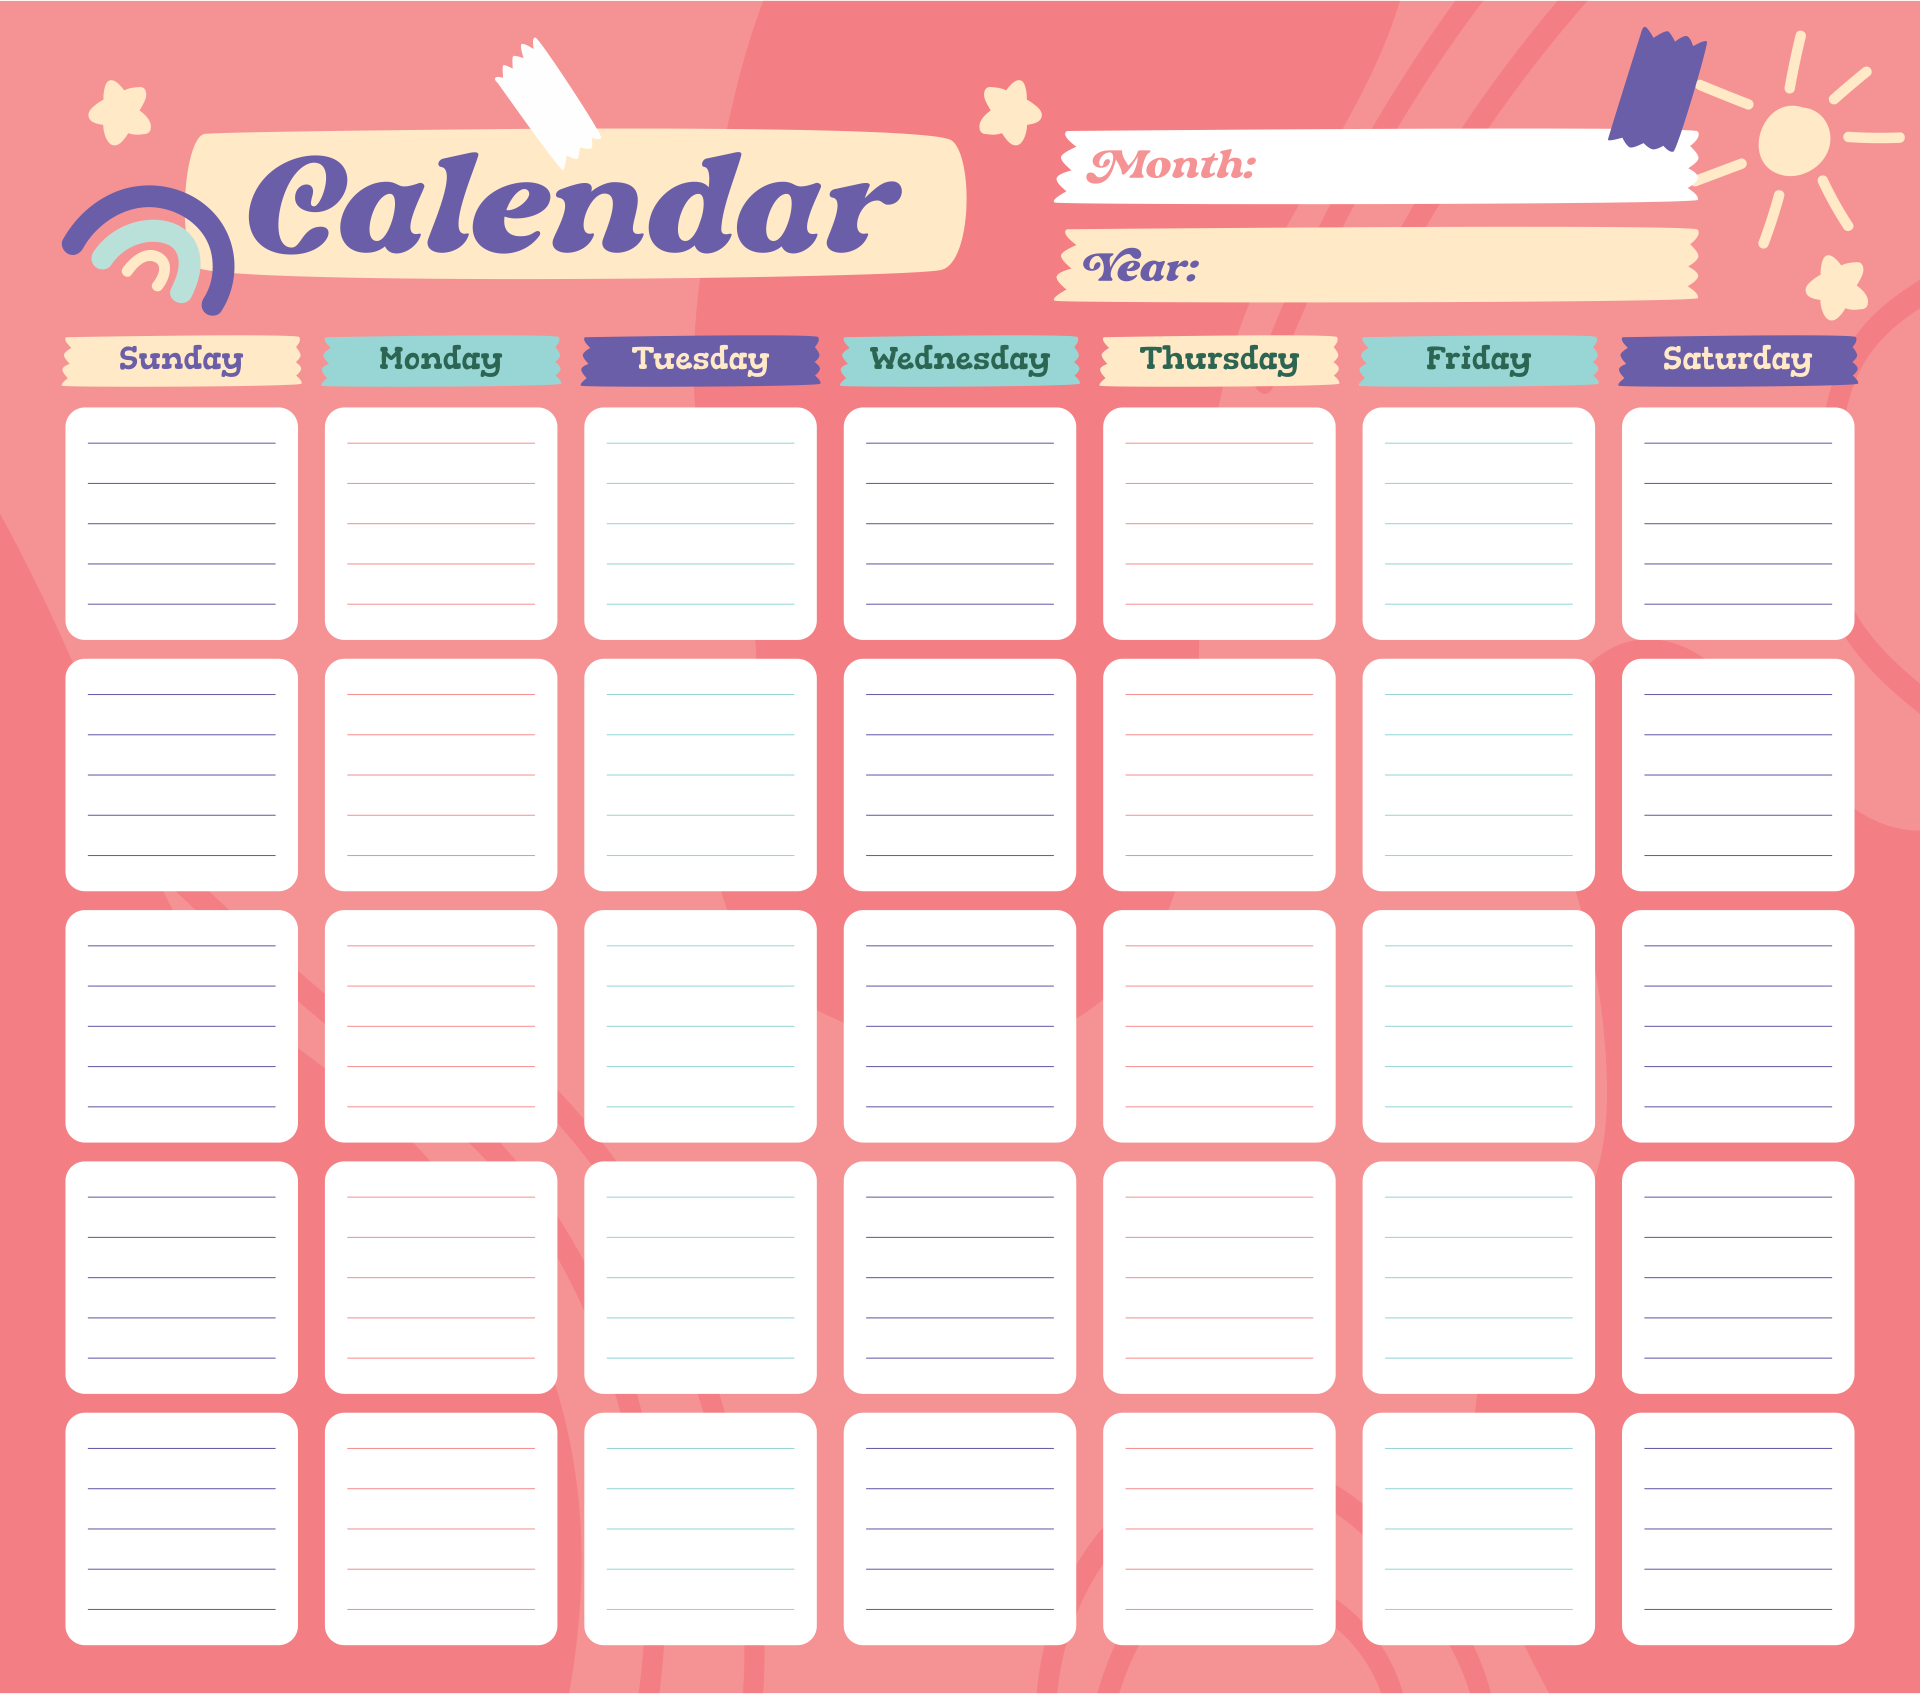 7 Best Images Of Printable Blank Monthly Calendar Template Blank Monthly Calendar 2014